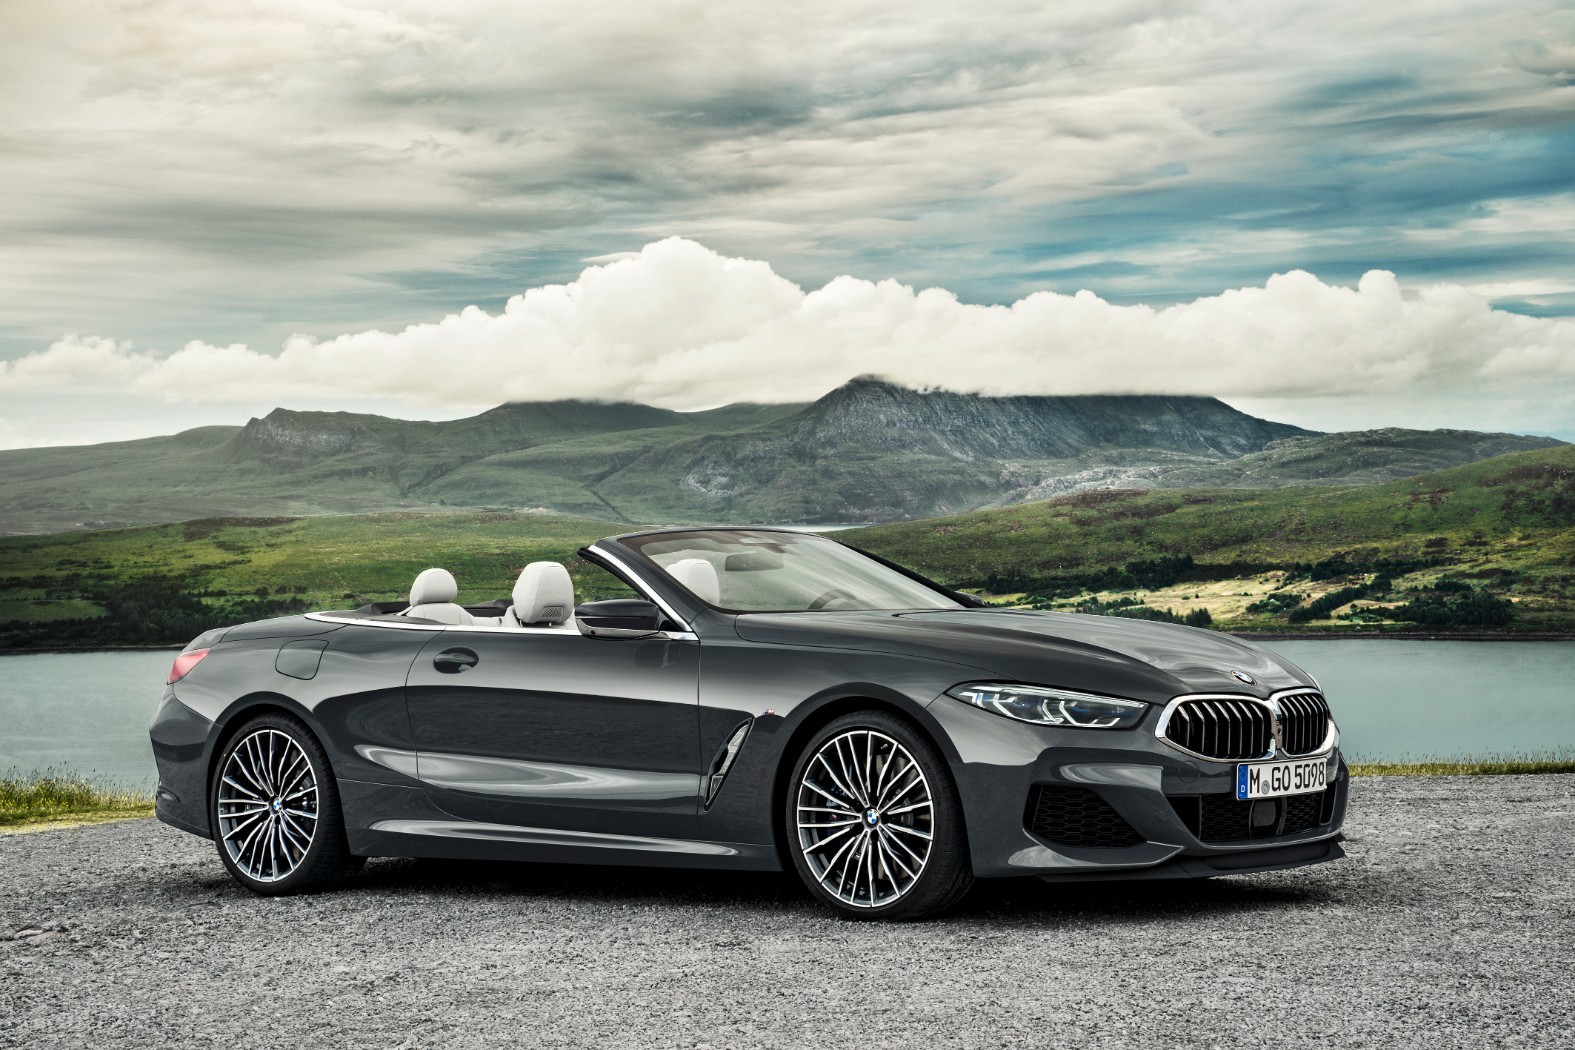 2020 BMW 8 Series Convertible Goes Official Before LA Auto Show